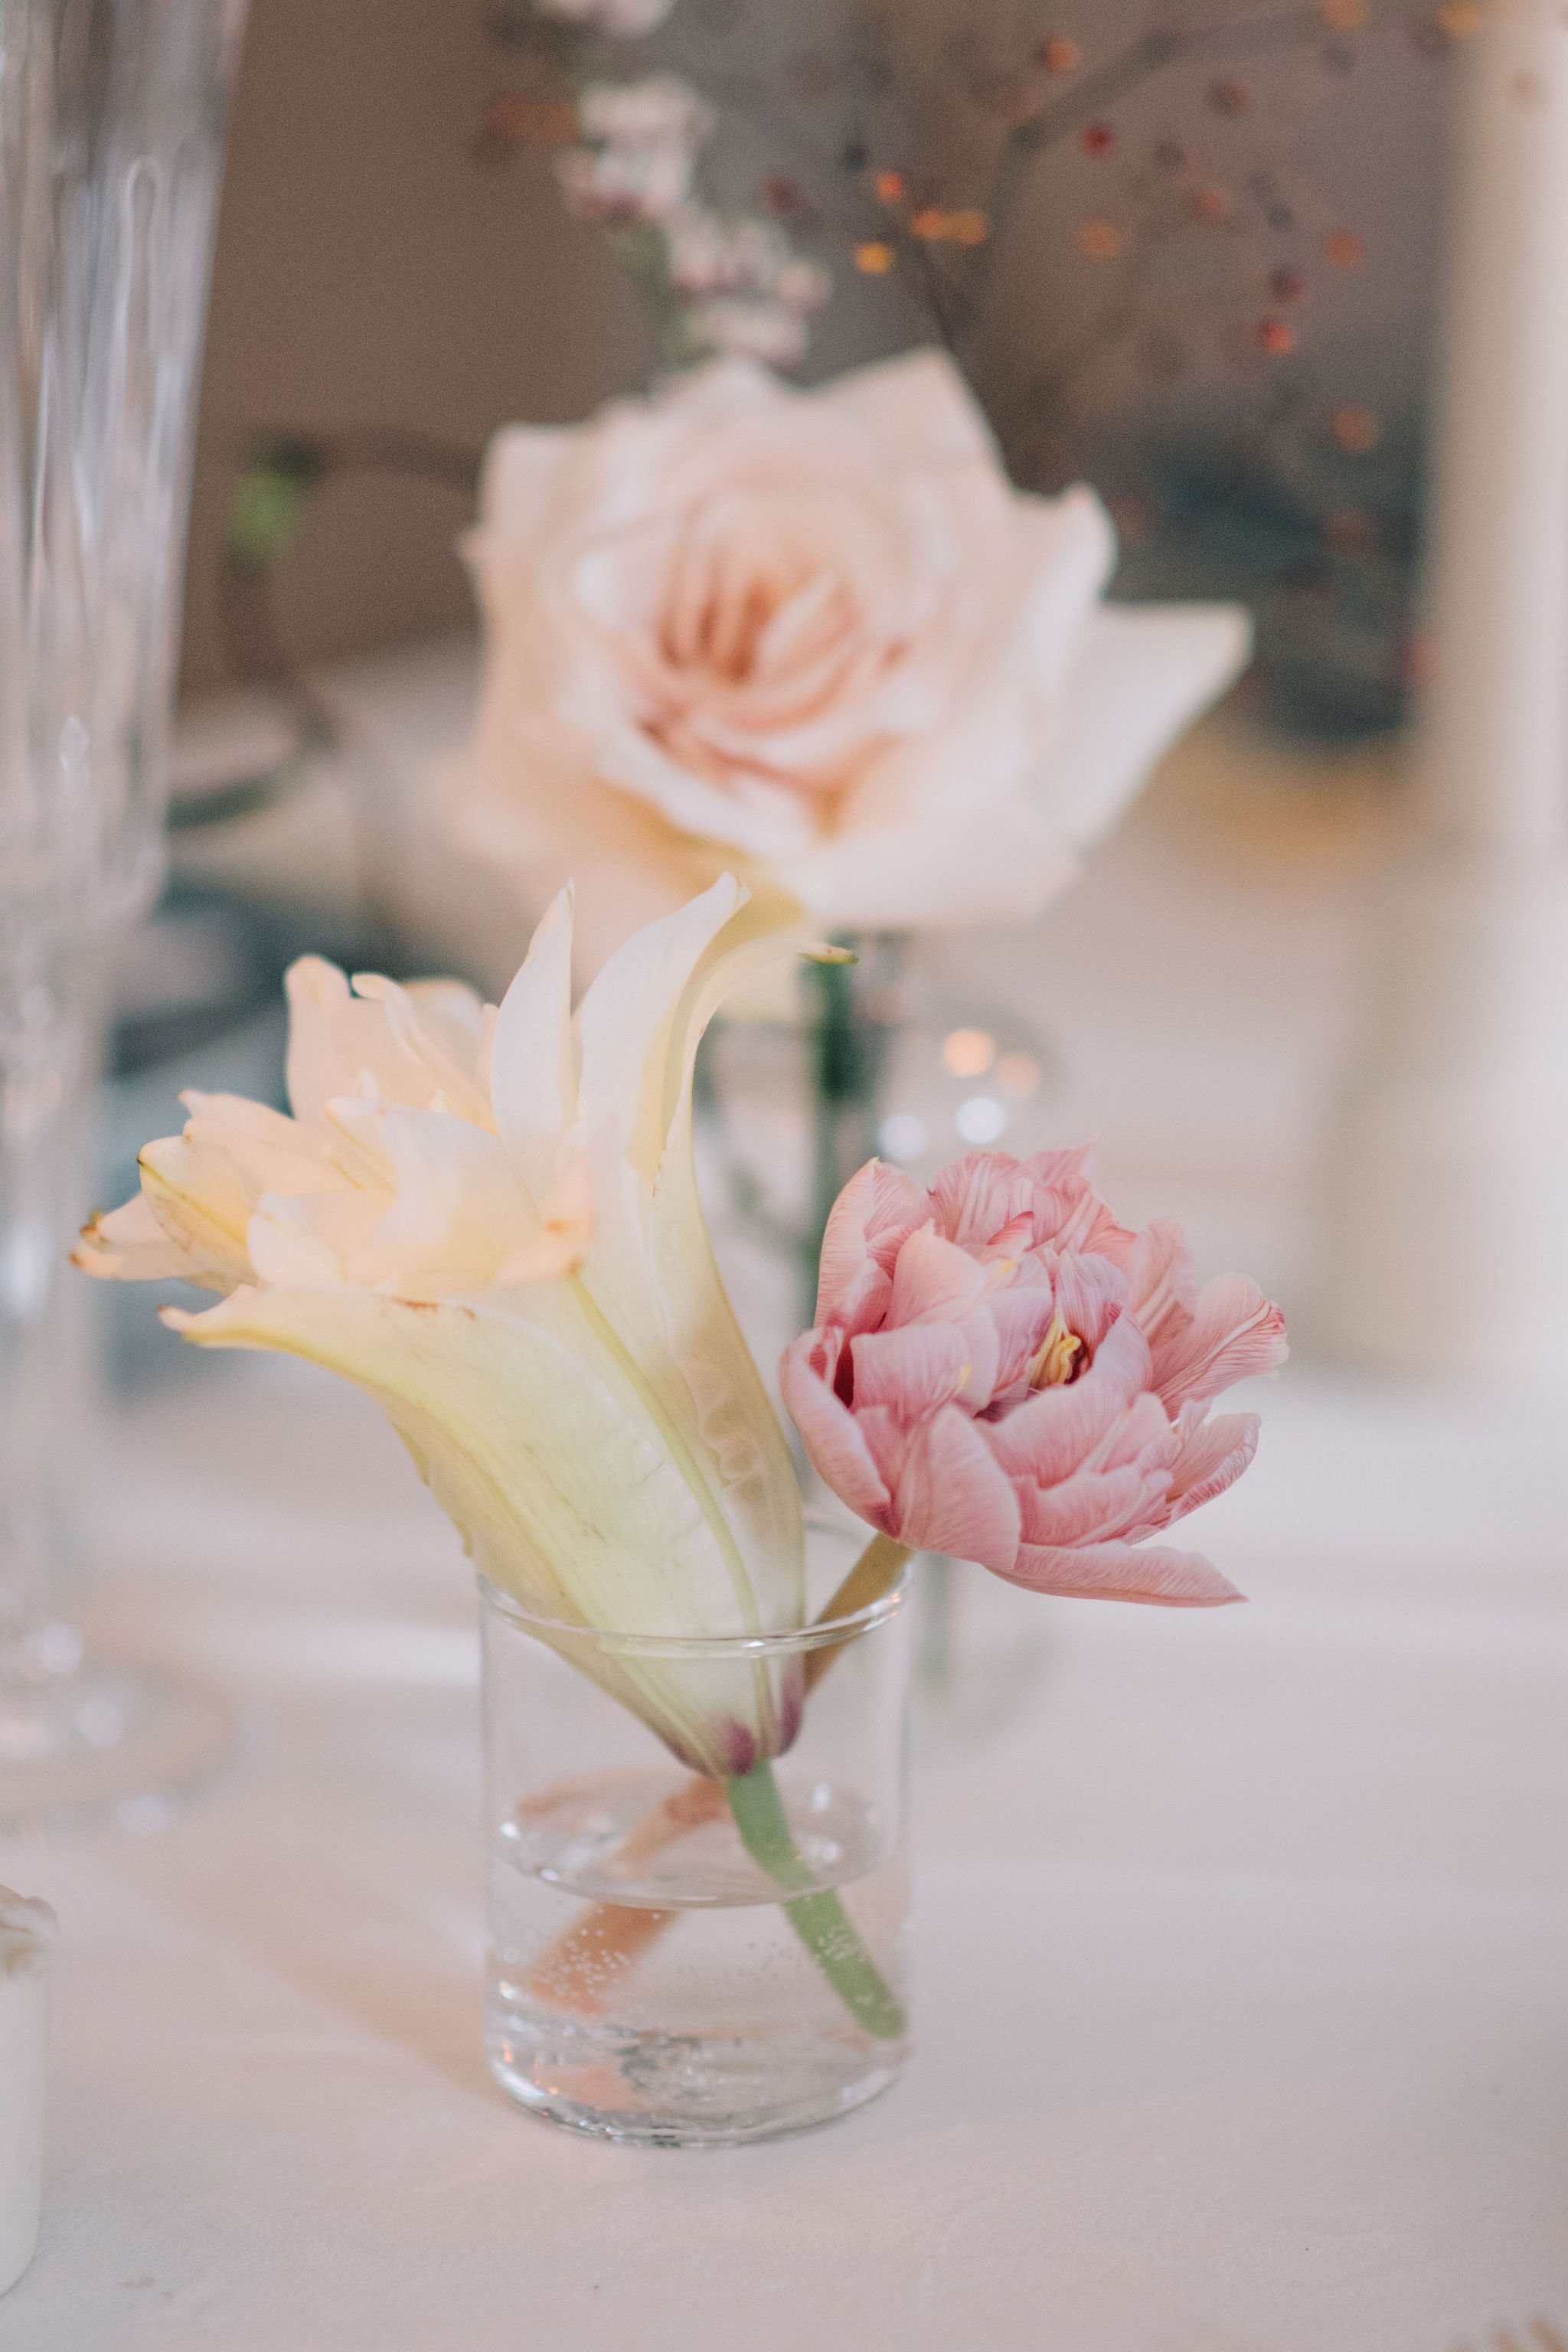 Delicate spring blooms for an intimate wedding dinner in the heart of downtown Toronto photographed by Toronto wedding photographers, Ugo Photography